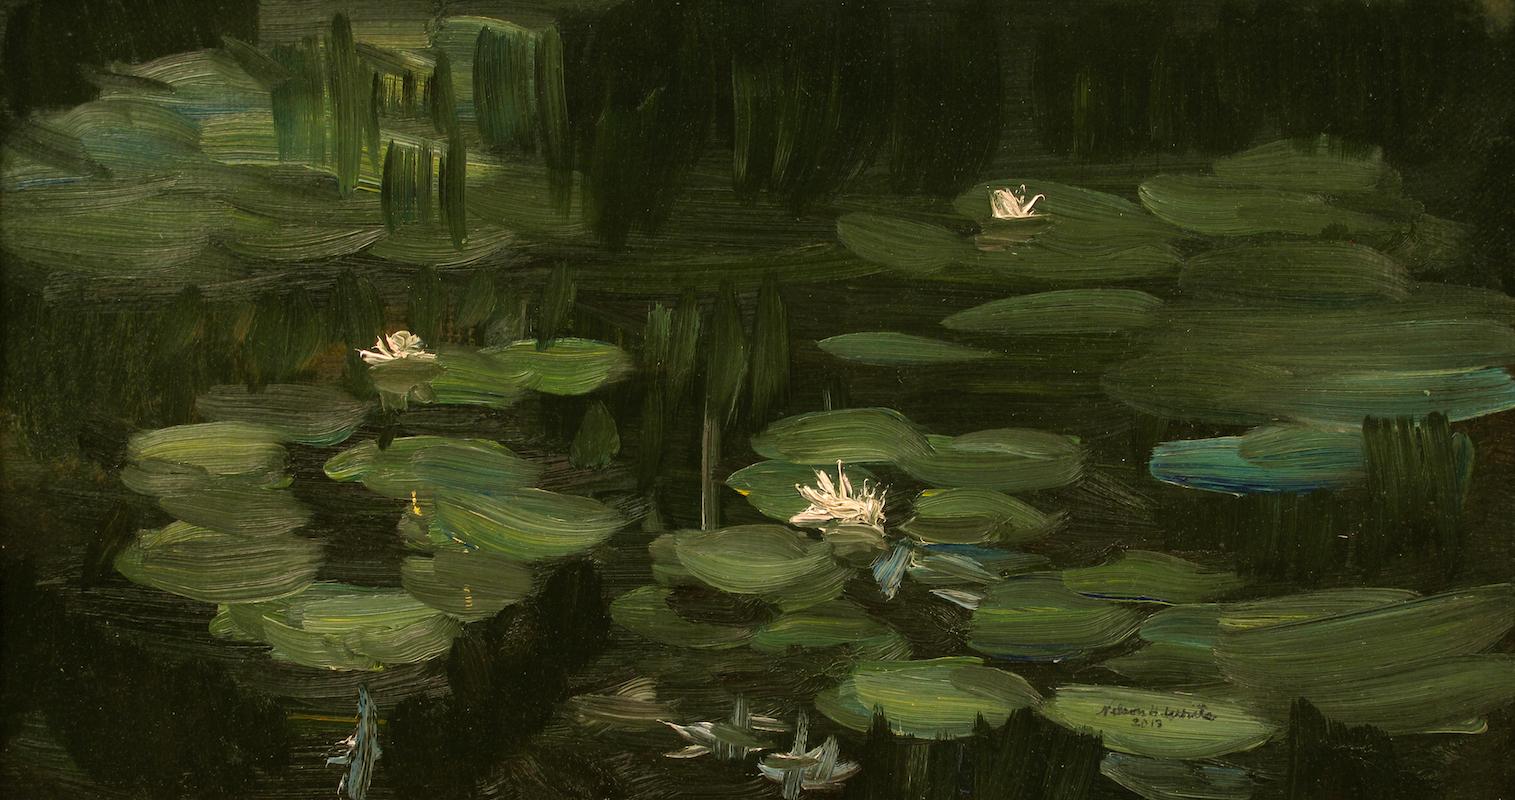 The Pond Lillies Sag Harbor, NY - Art by Nelson White